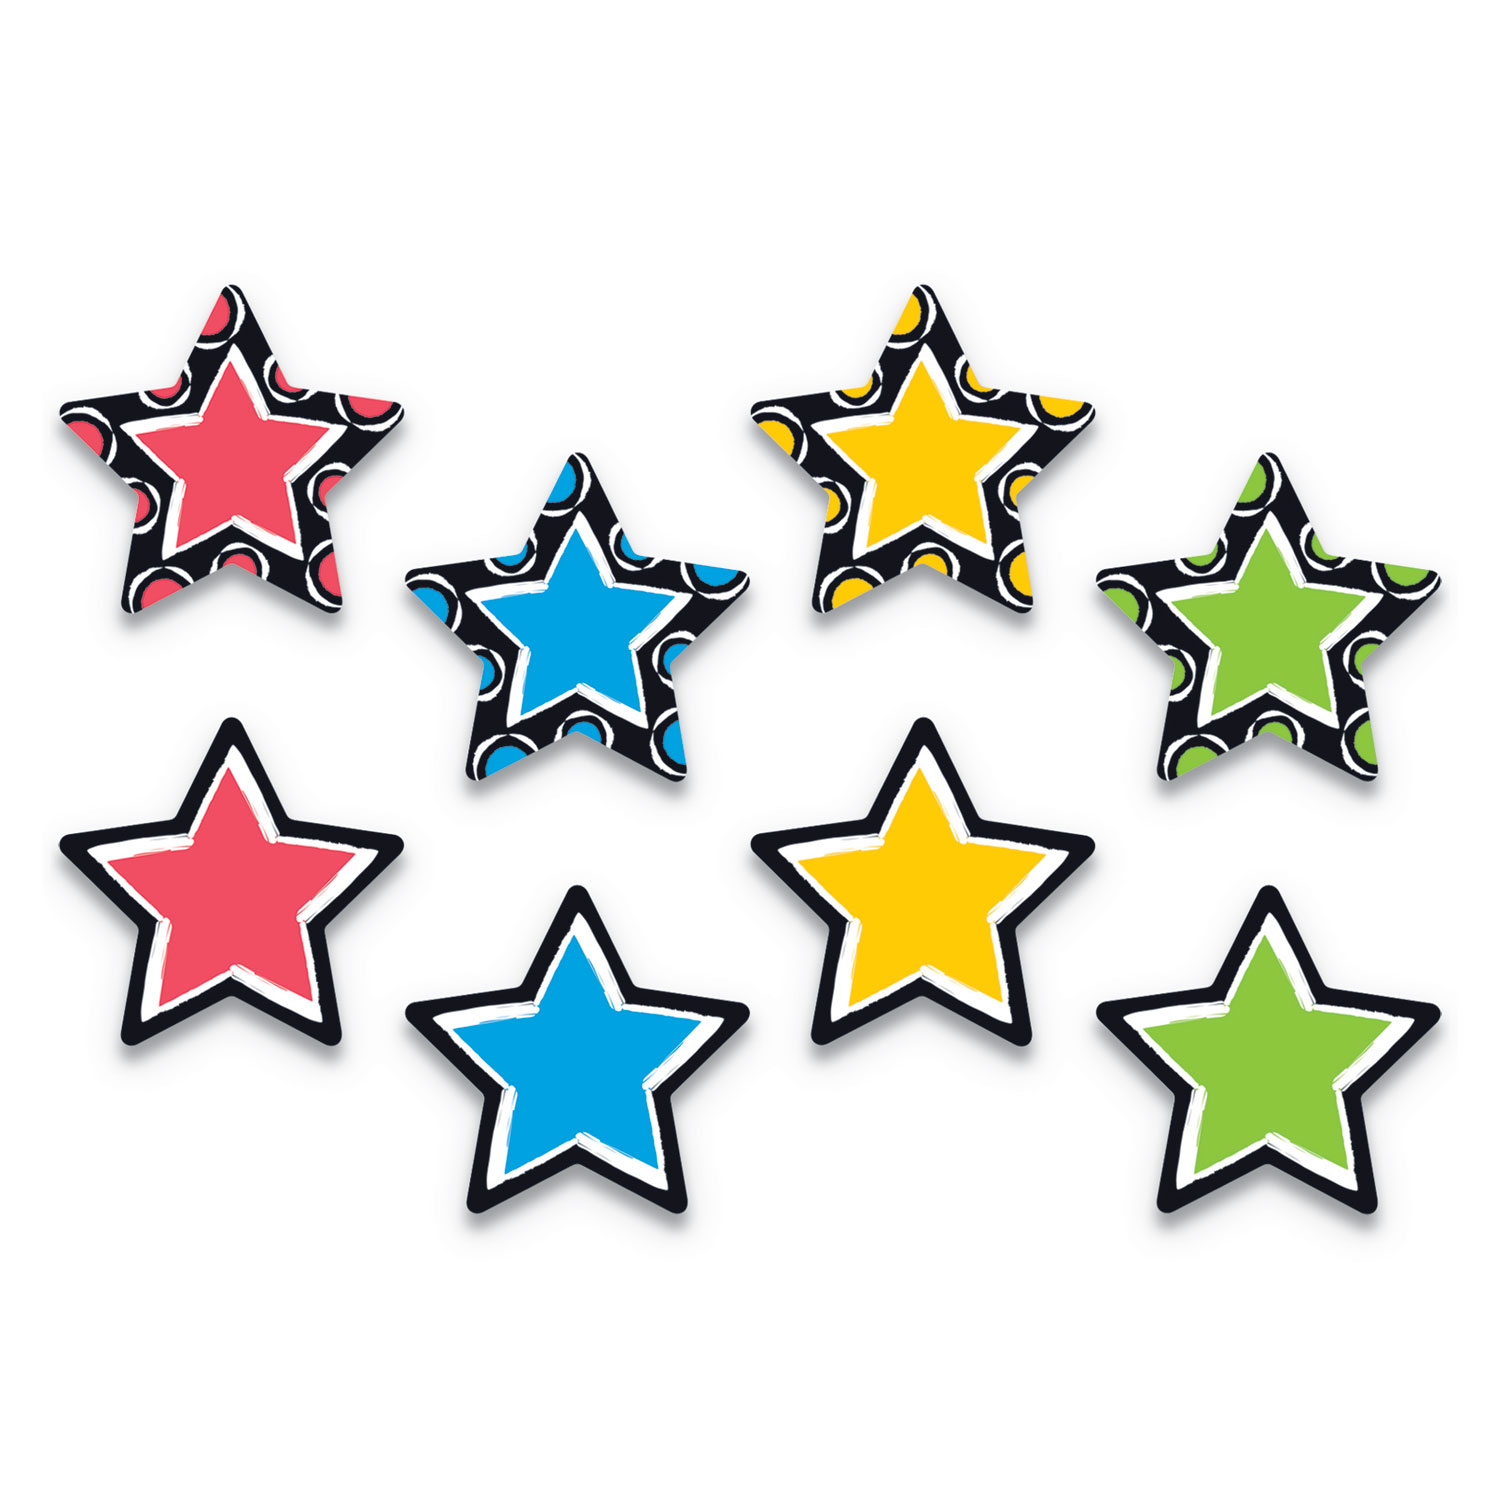  TREND T10660 Bold Strokes Stars Classic Accents Variety Pack, Blue/Green/Red/Yellow (TEPT10660) 